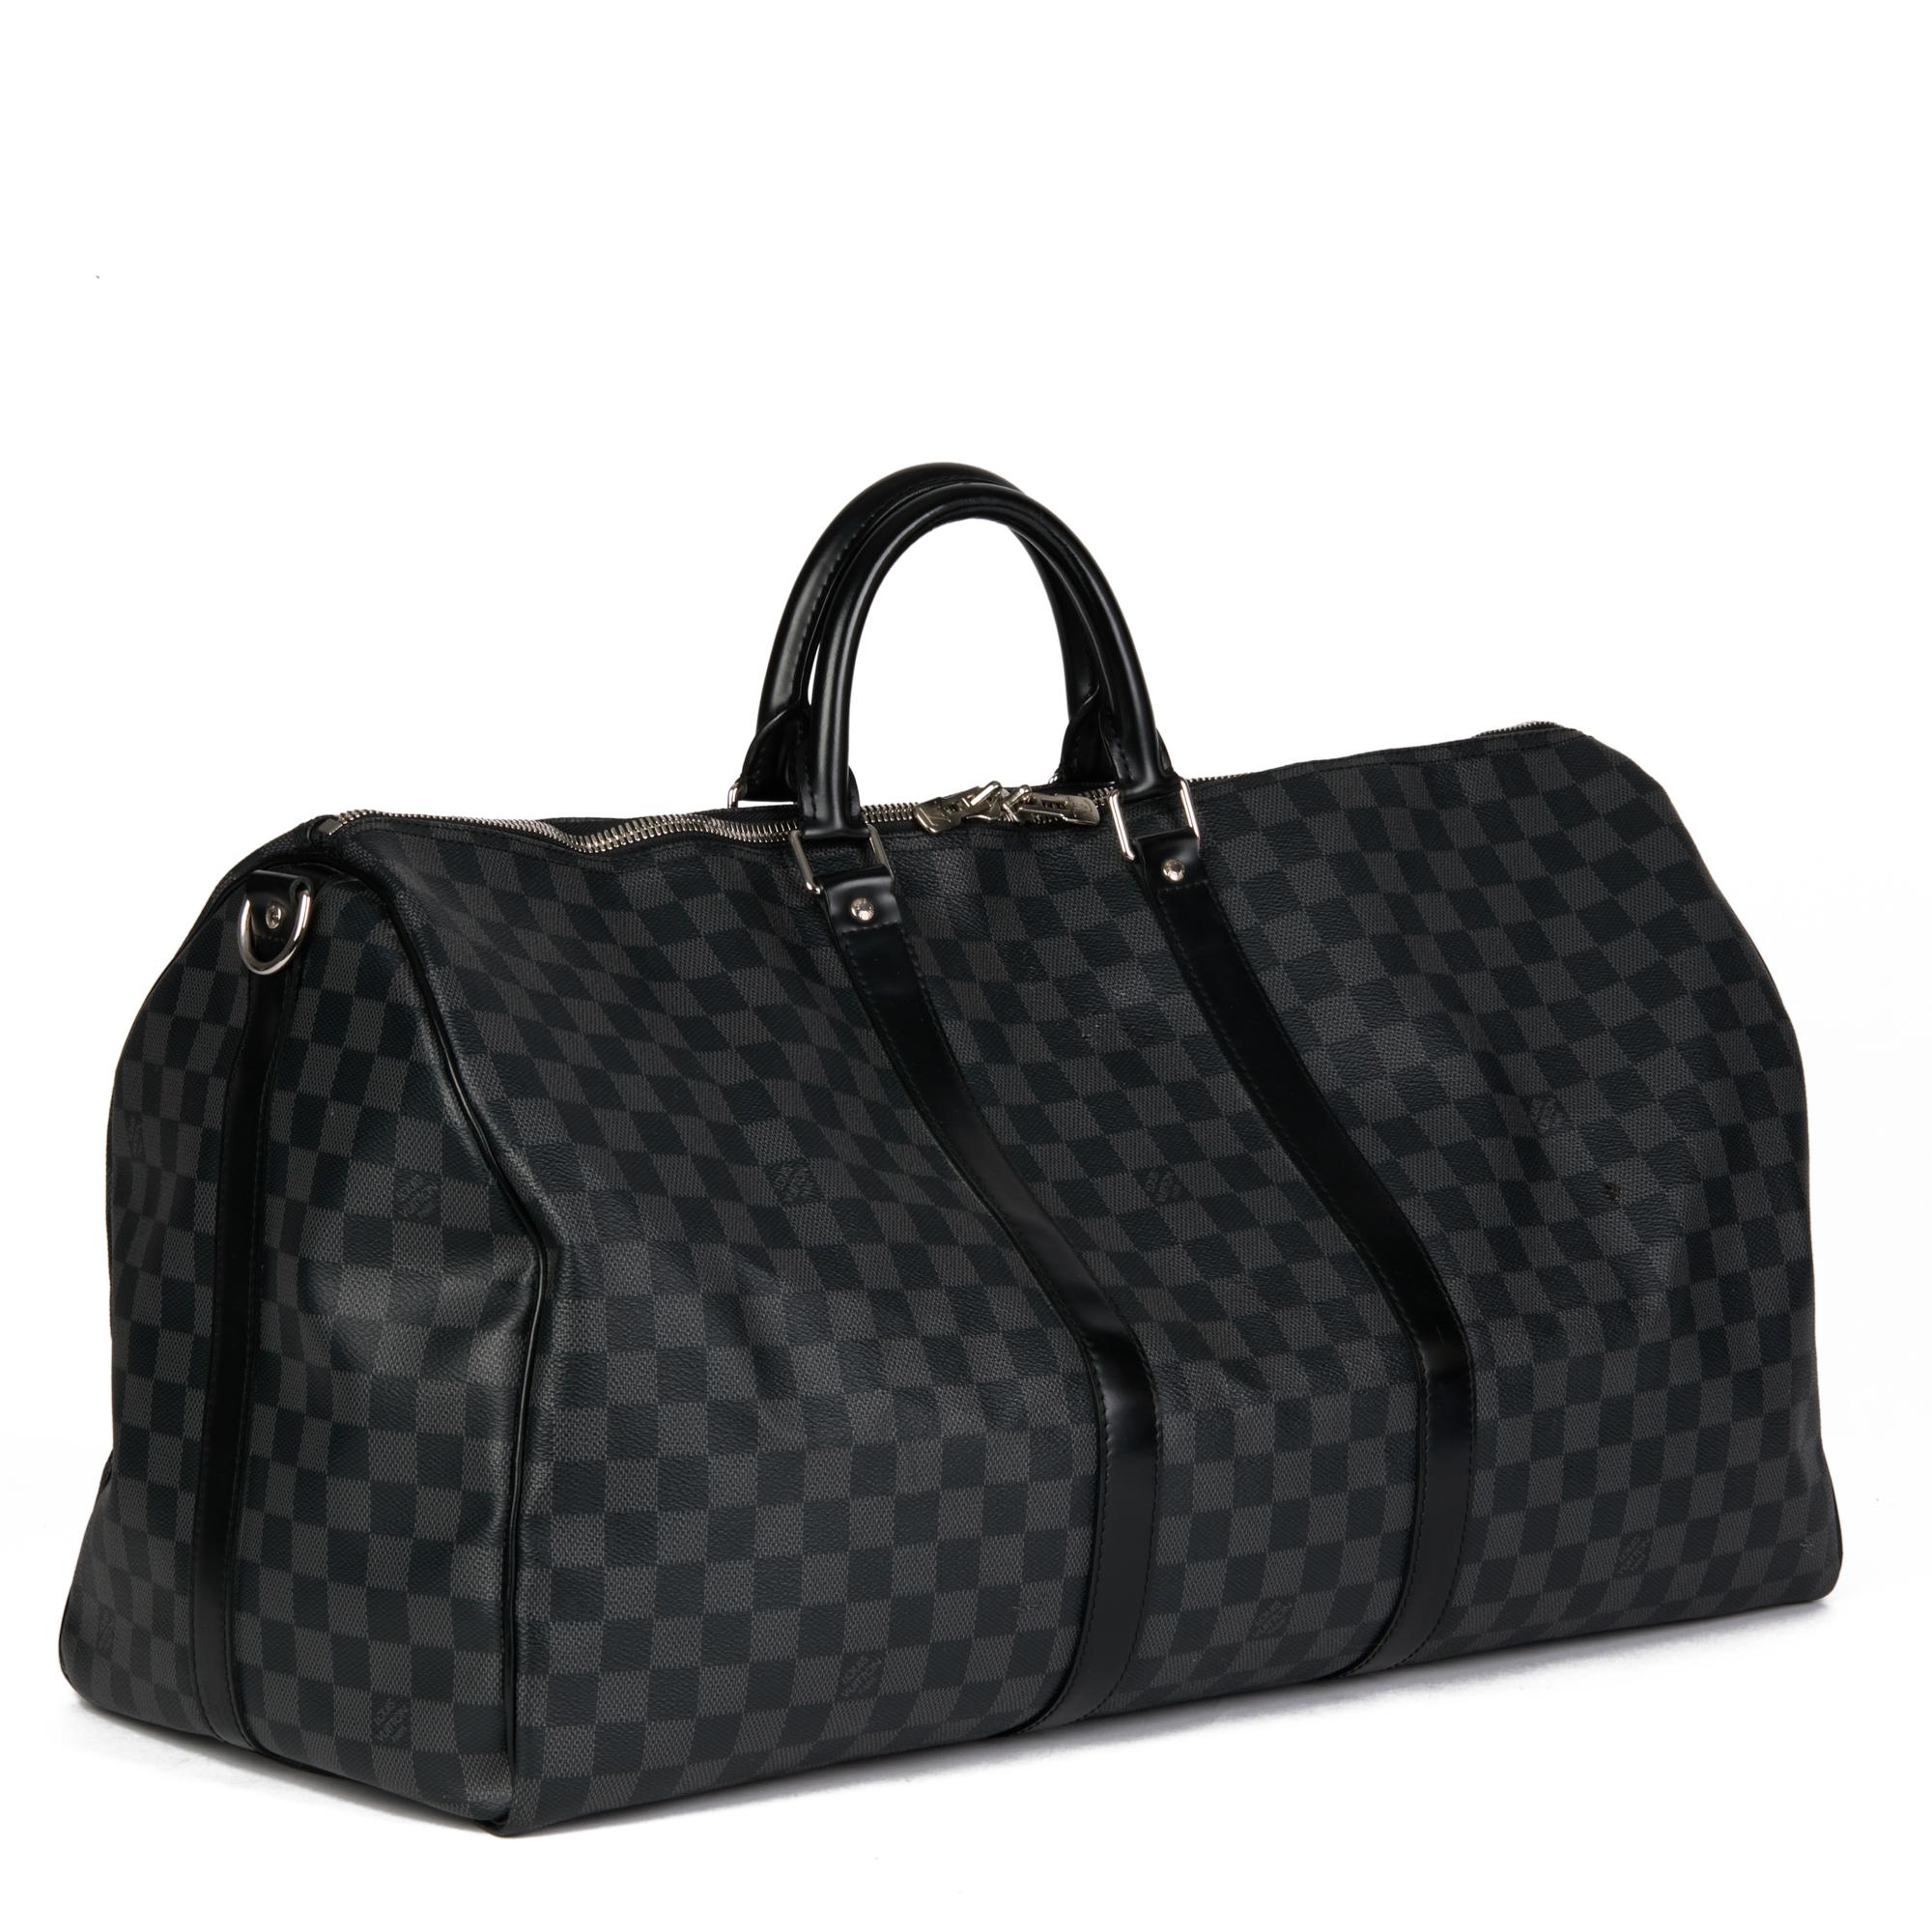 LOUIS VUITTON
Graphite Damier Coated Canvas & Black Calfskin Leather Keepall 50 Bandouliere

Xupes Reference: CB644
Serial Number: MR5103
Age (Circa): 2013
Accompanied By: (Missing Shoulder Strap)
Authenticity Details: Date Stamp (Made in